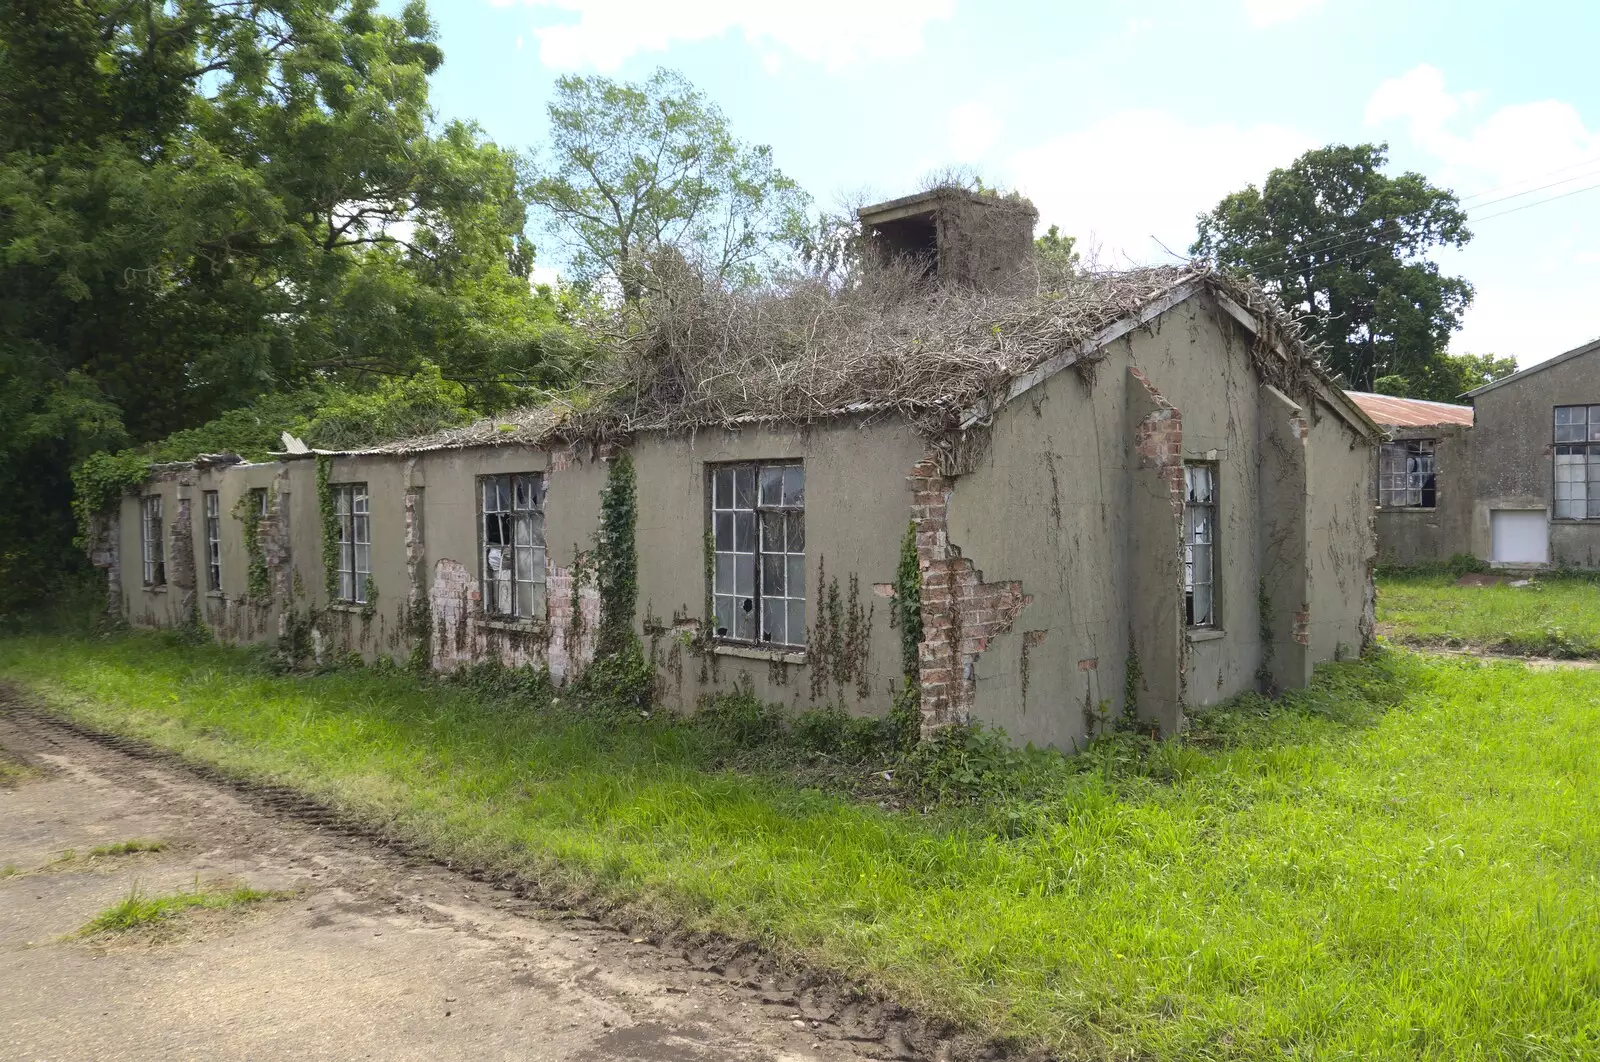 Some of the buildings are very derelict, from A 1940s Timewarp, Site 4, Bungay Airfield, Flixton, Suffolk - 9th June 2022